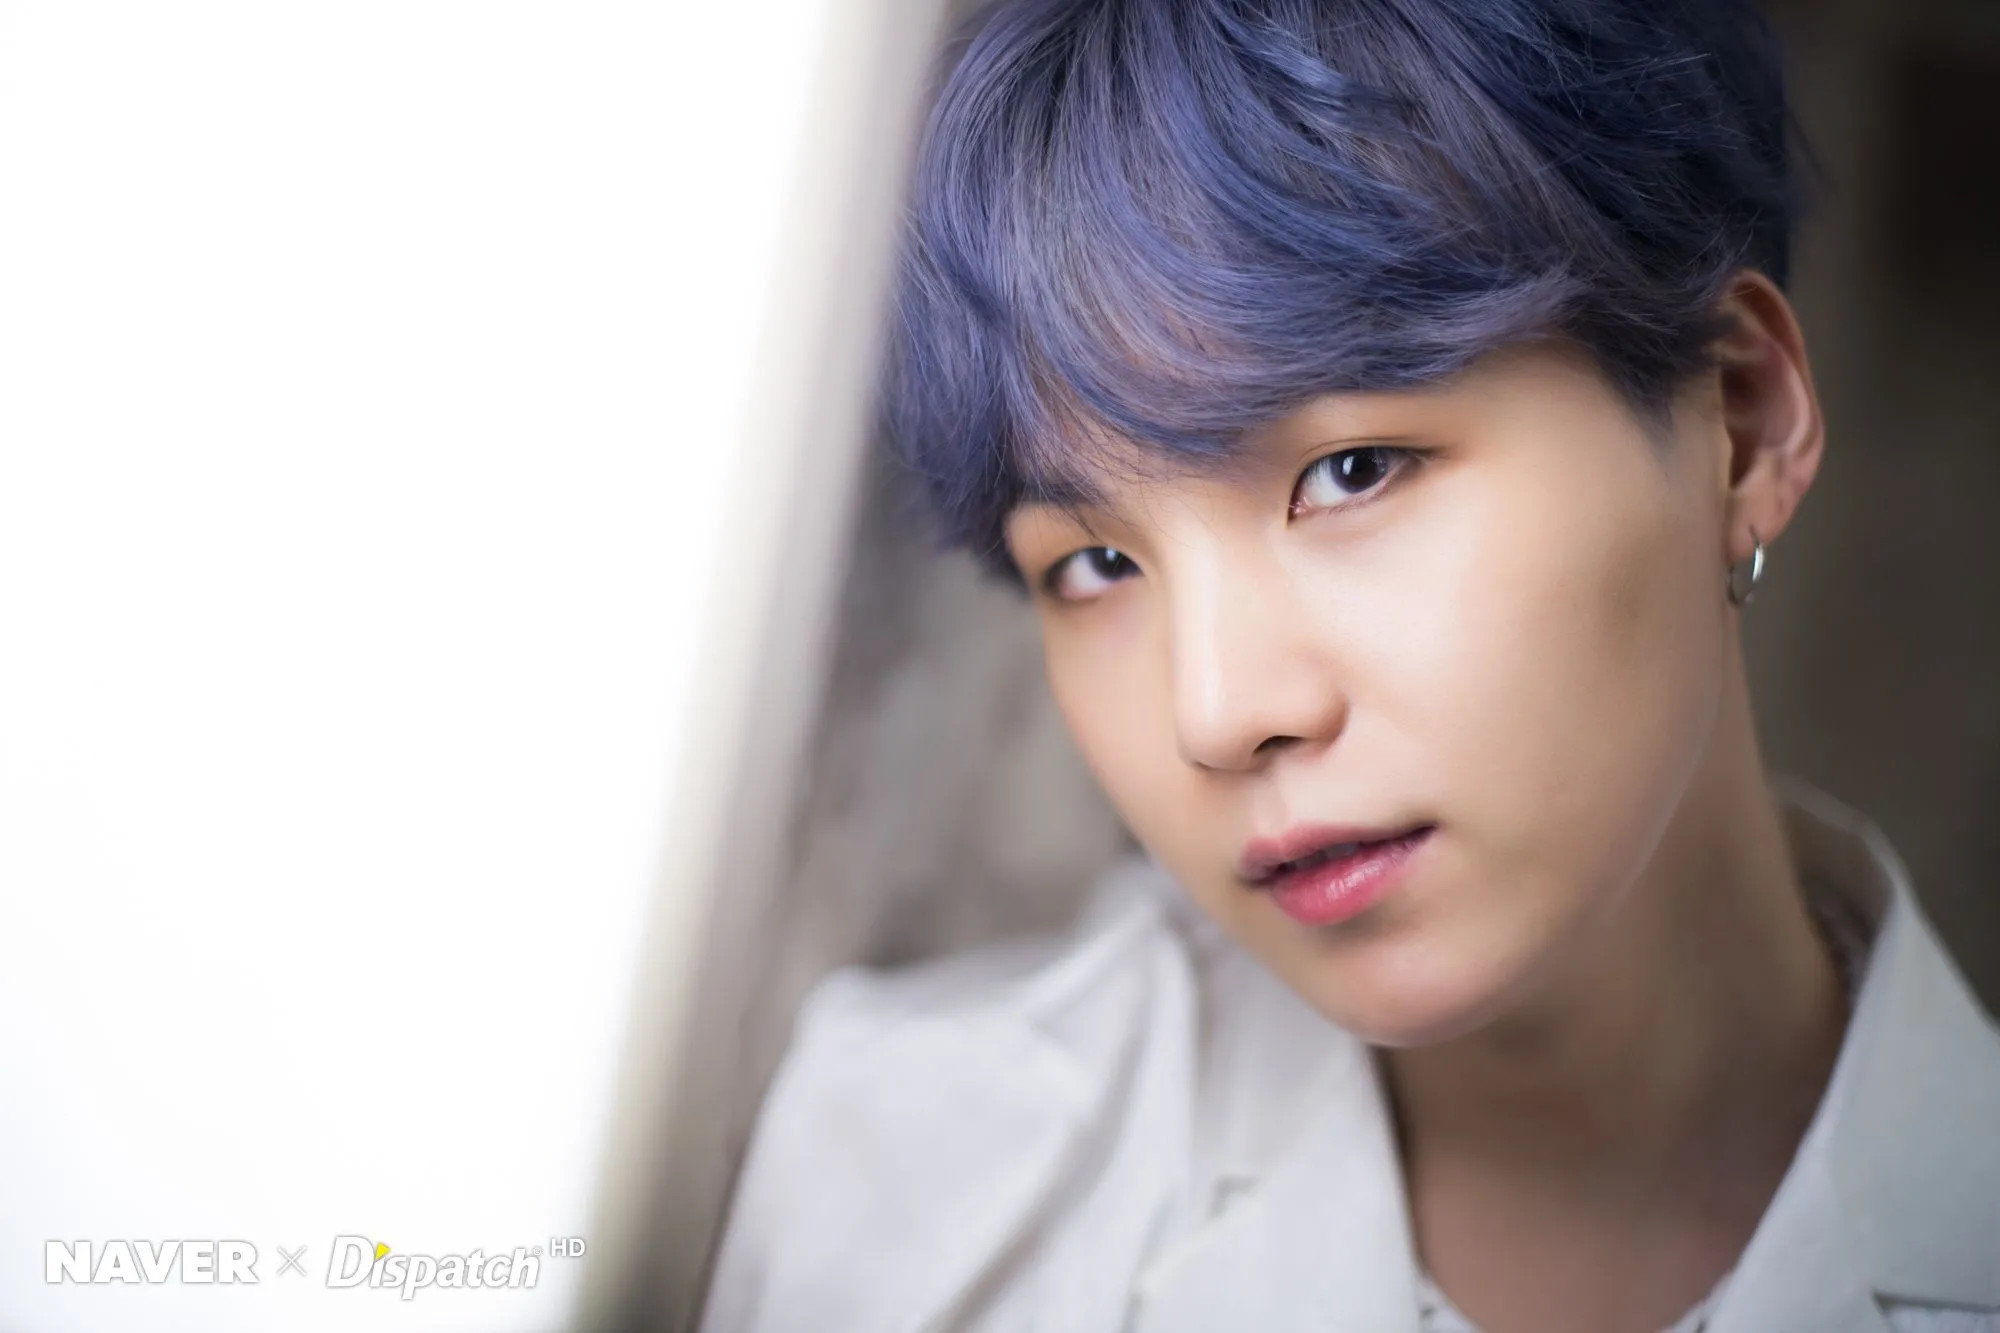 BTS' Suga 'Boy With Luv' Music Video Filming by Naver x Dispatch | kpopping